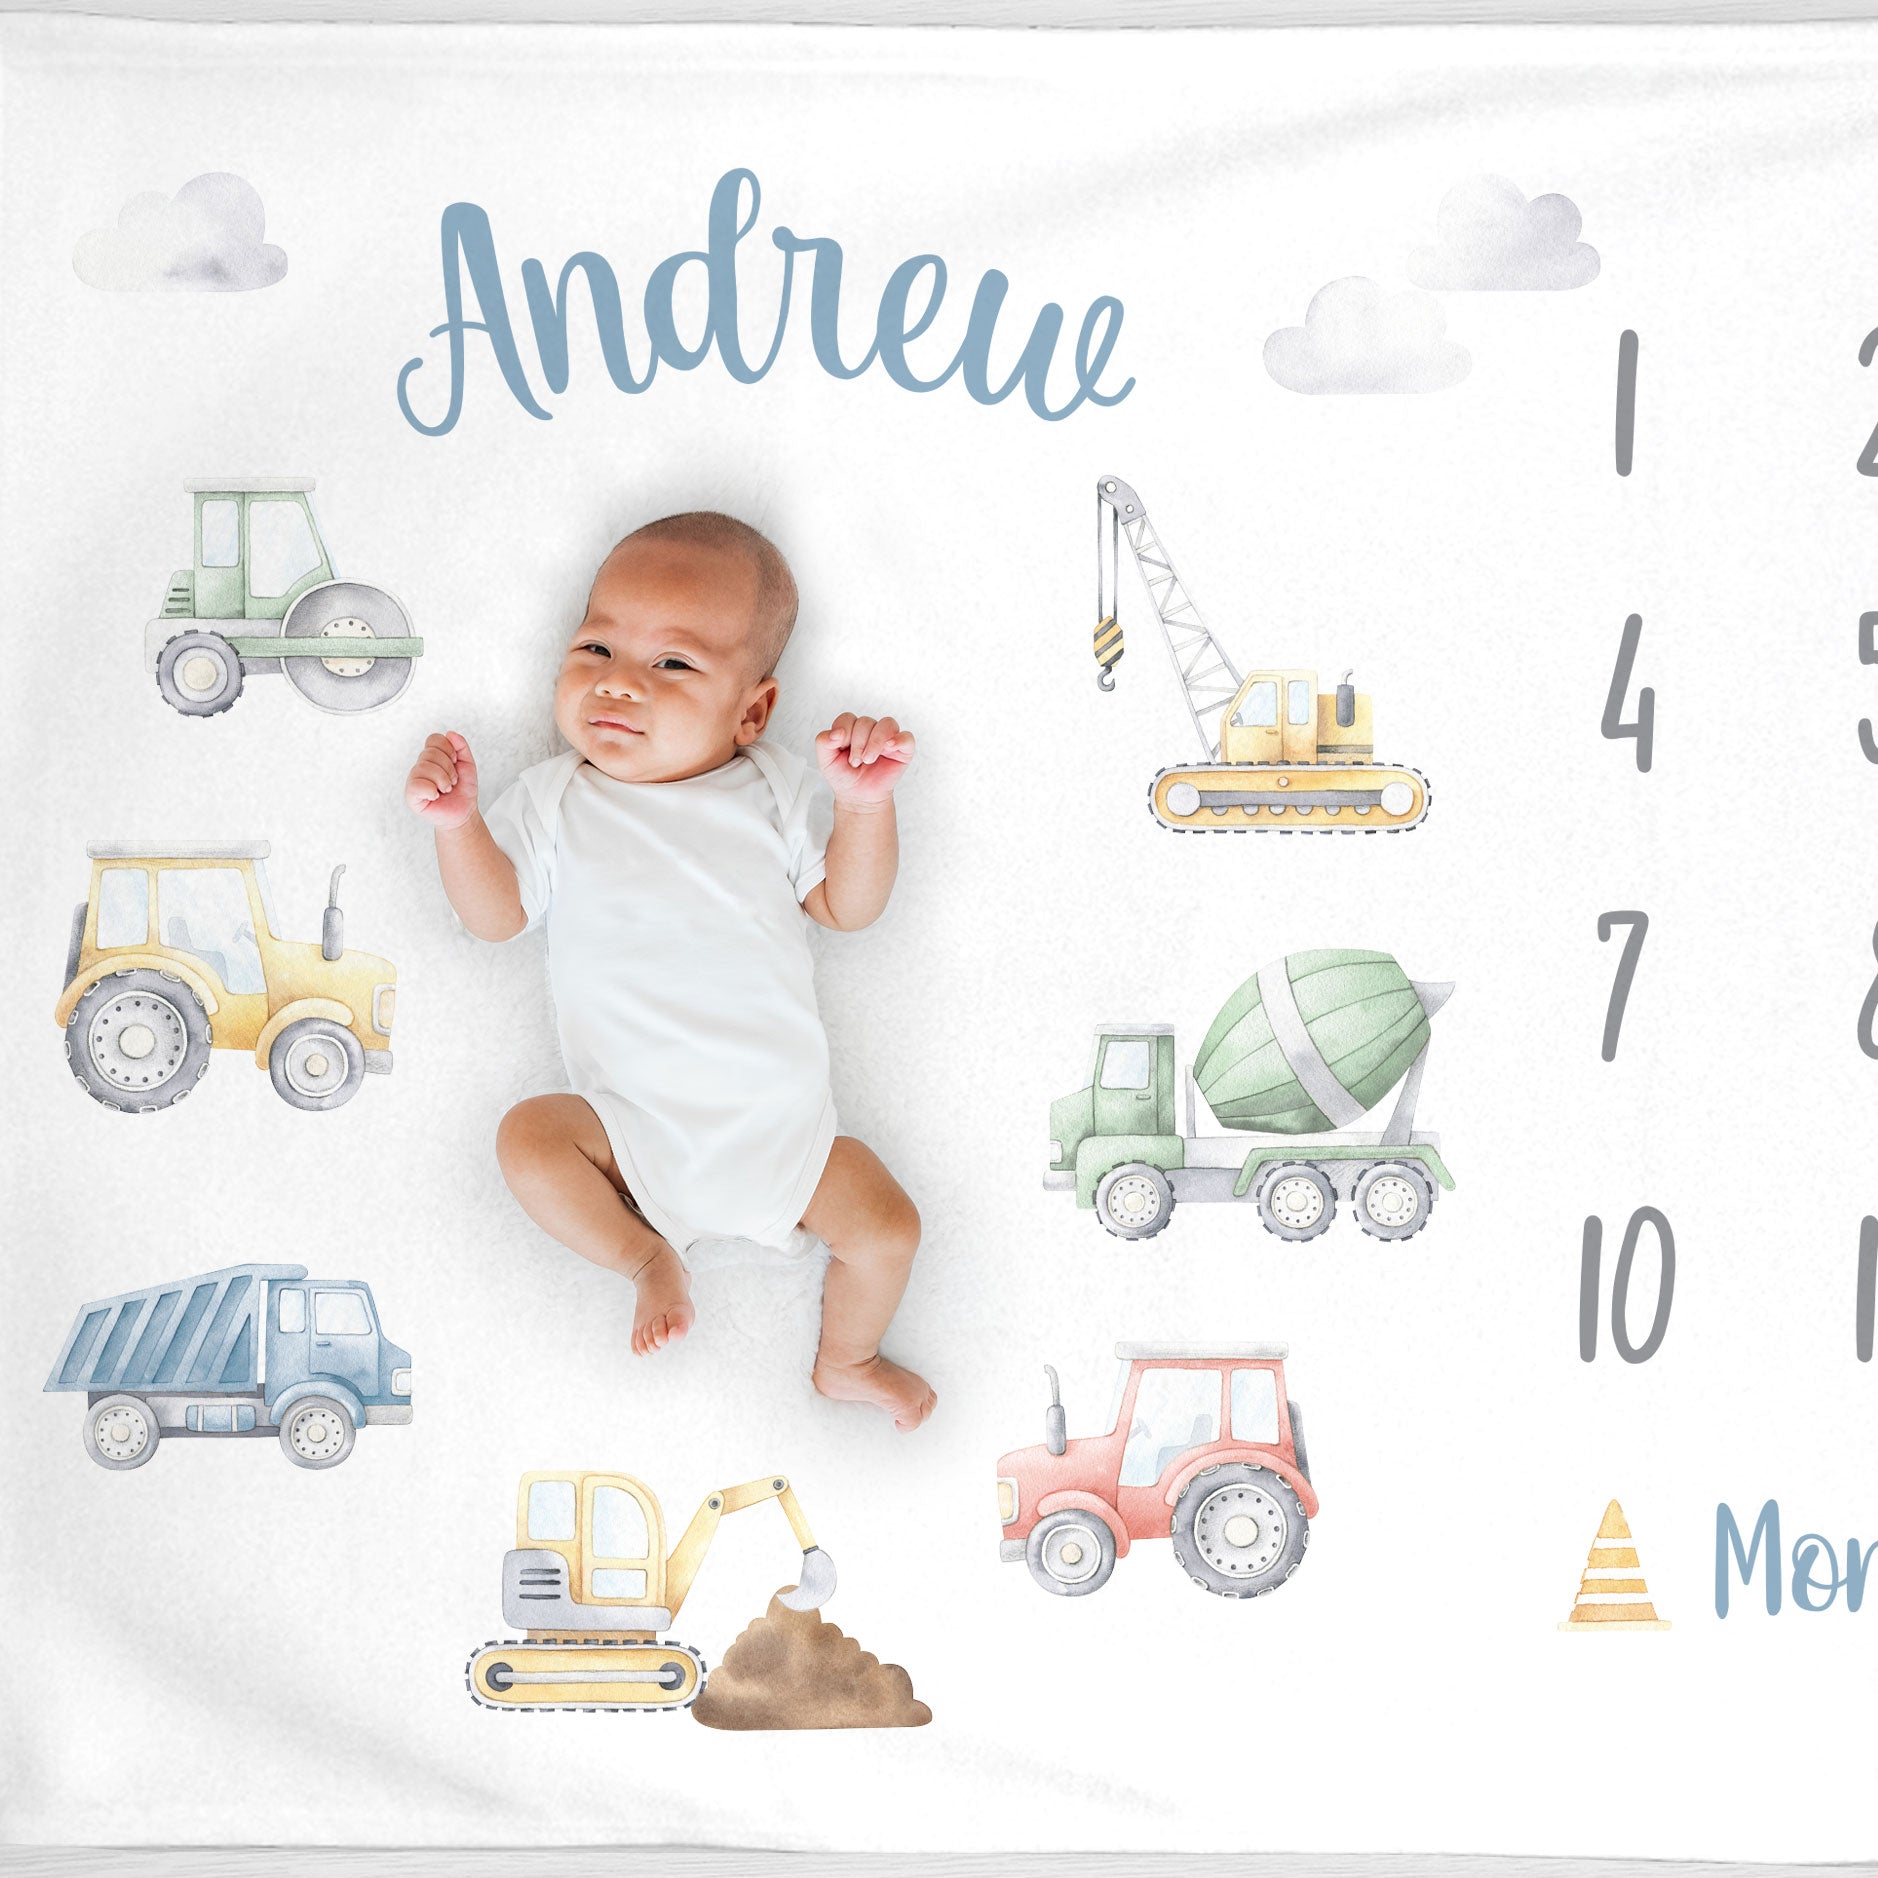 Truck Milestone Blanket for baby boys, featuring construction vehicles (backhoe, crane, tractor, steam roller, dump truck, and cement mixer), Personalized from Pipsy.com